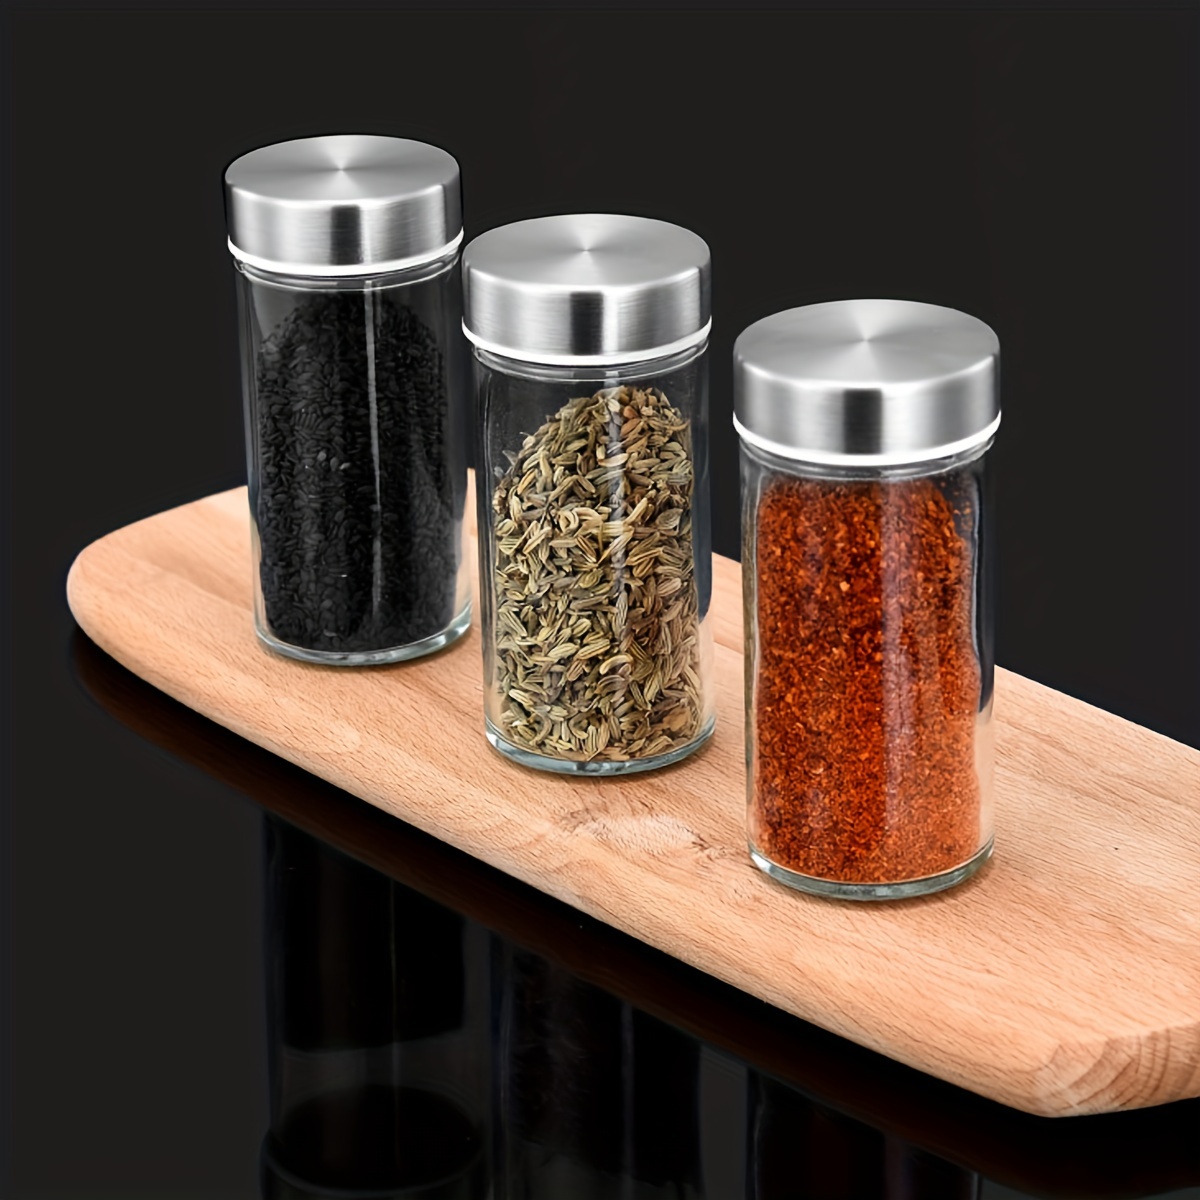 1 Set, Spices And Seasonings Sets, Countertop Spice Rack With 12 Jars,  Spice Organizer For Countertop Or Cabinet, Multifunctional Seasoning  Organizer